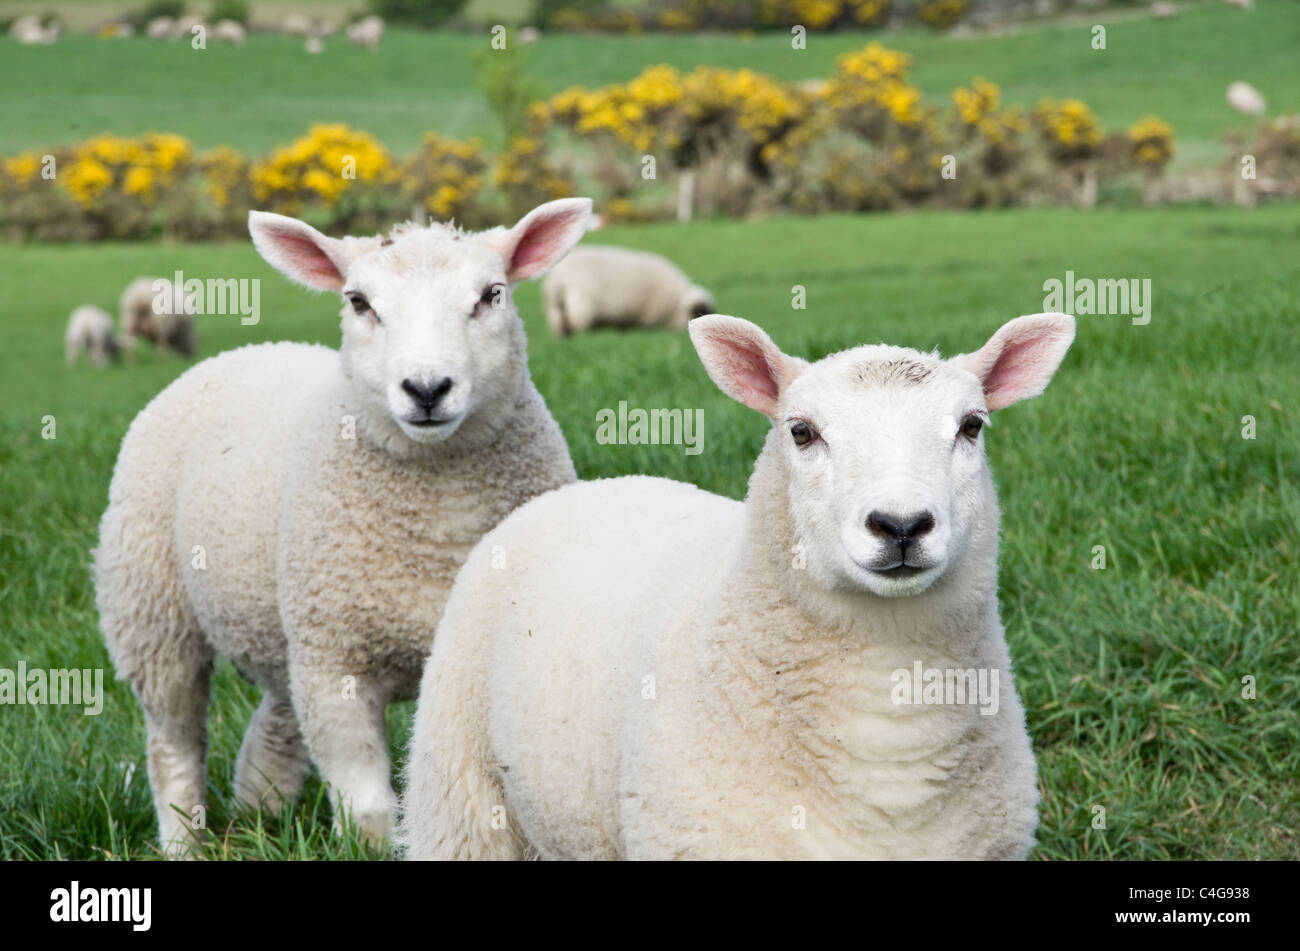 Two healthy inquisitive twin lambs in a country side field of sheep in spring. Isle of Anglesey, North Wales, UK, Britain Stock Photo